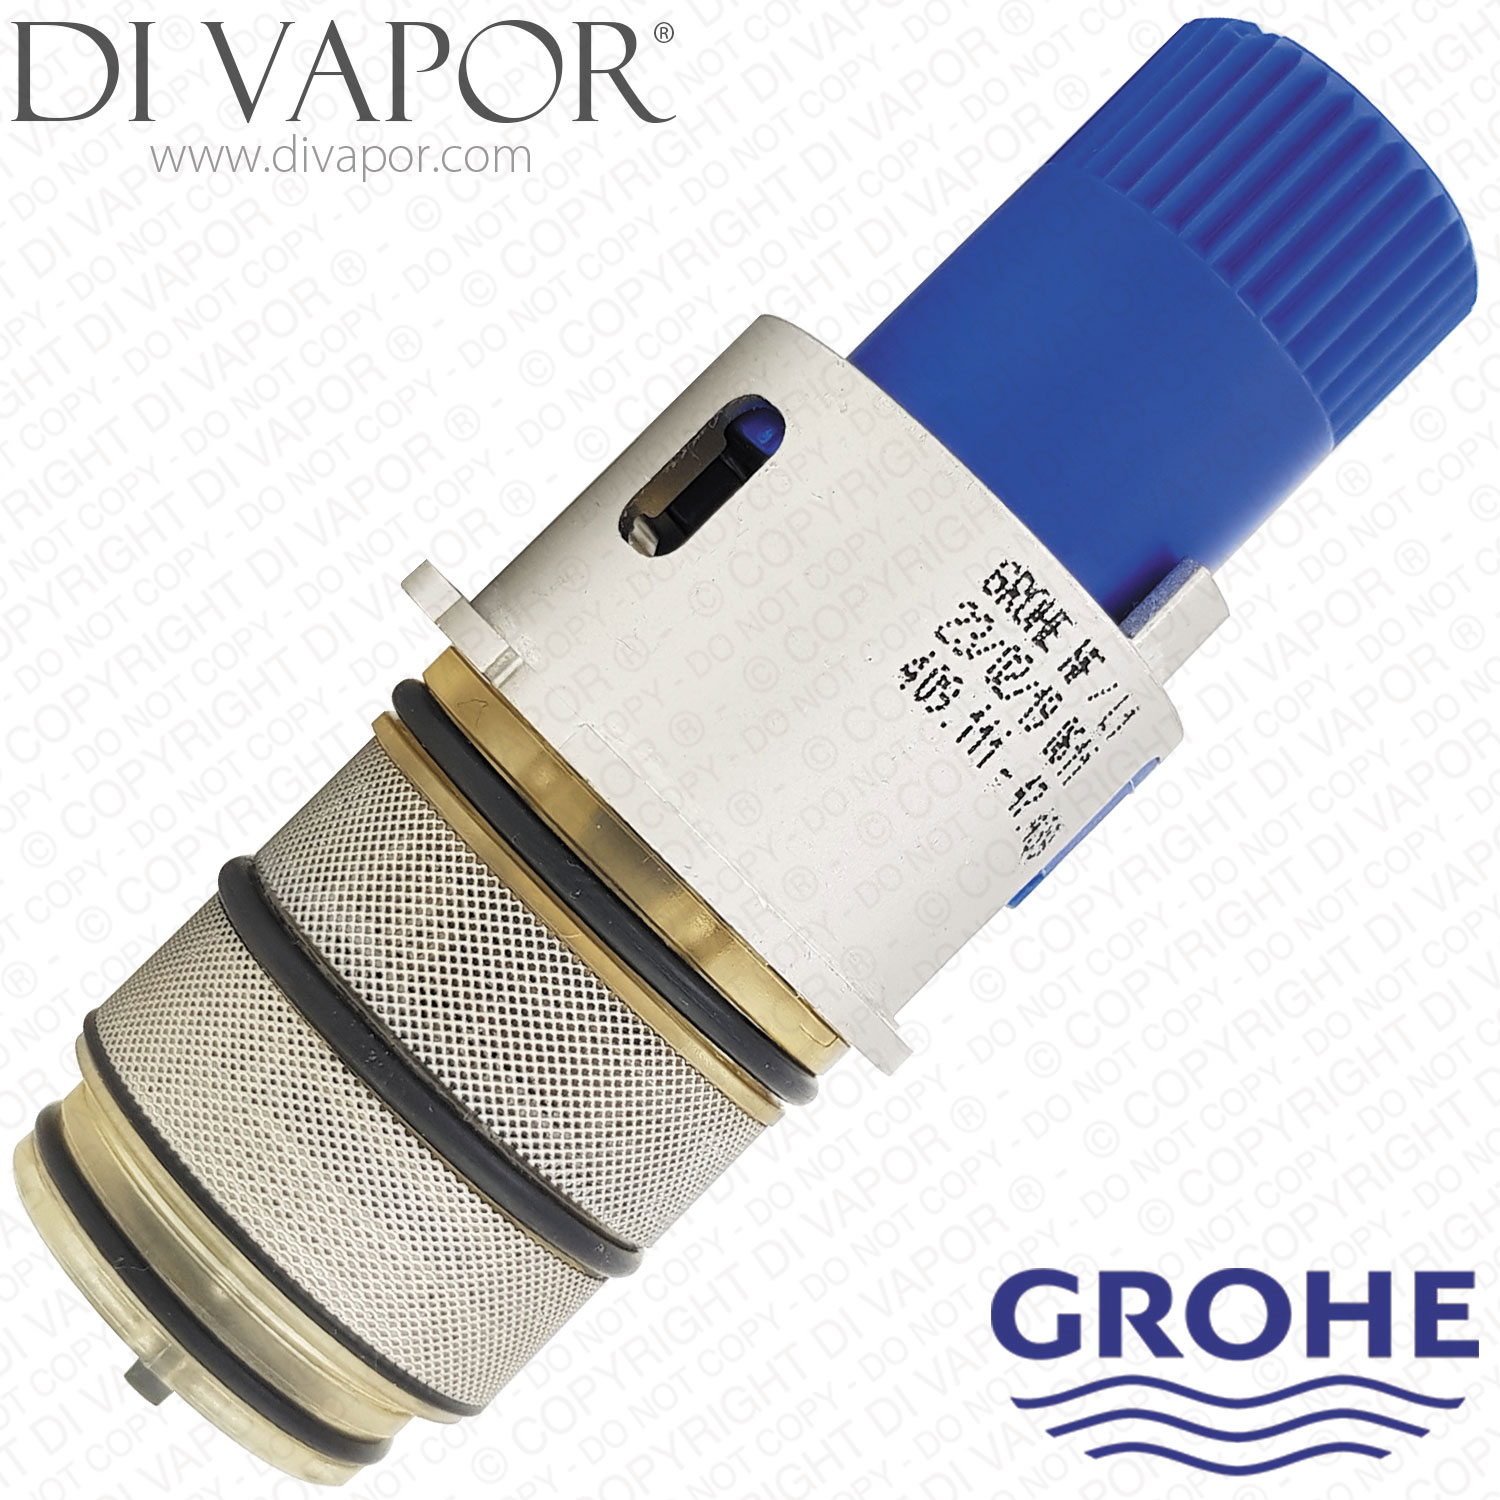 Grohe 47439000 Compact Thermostatic Cartridge